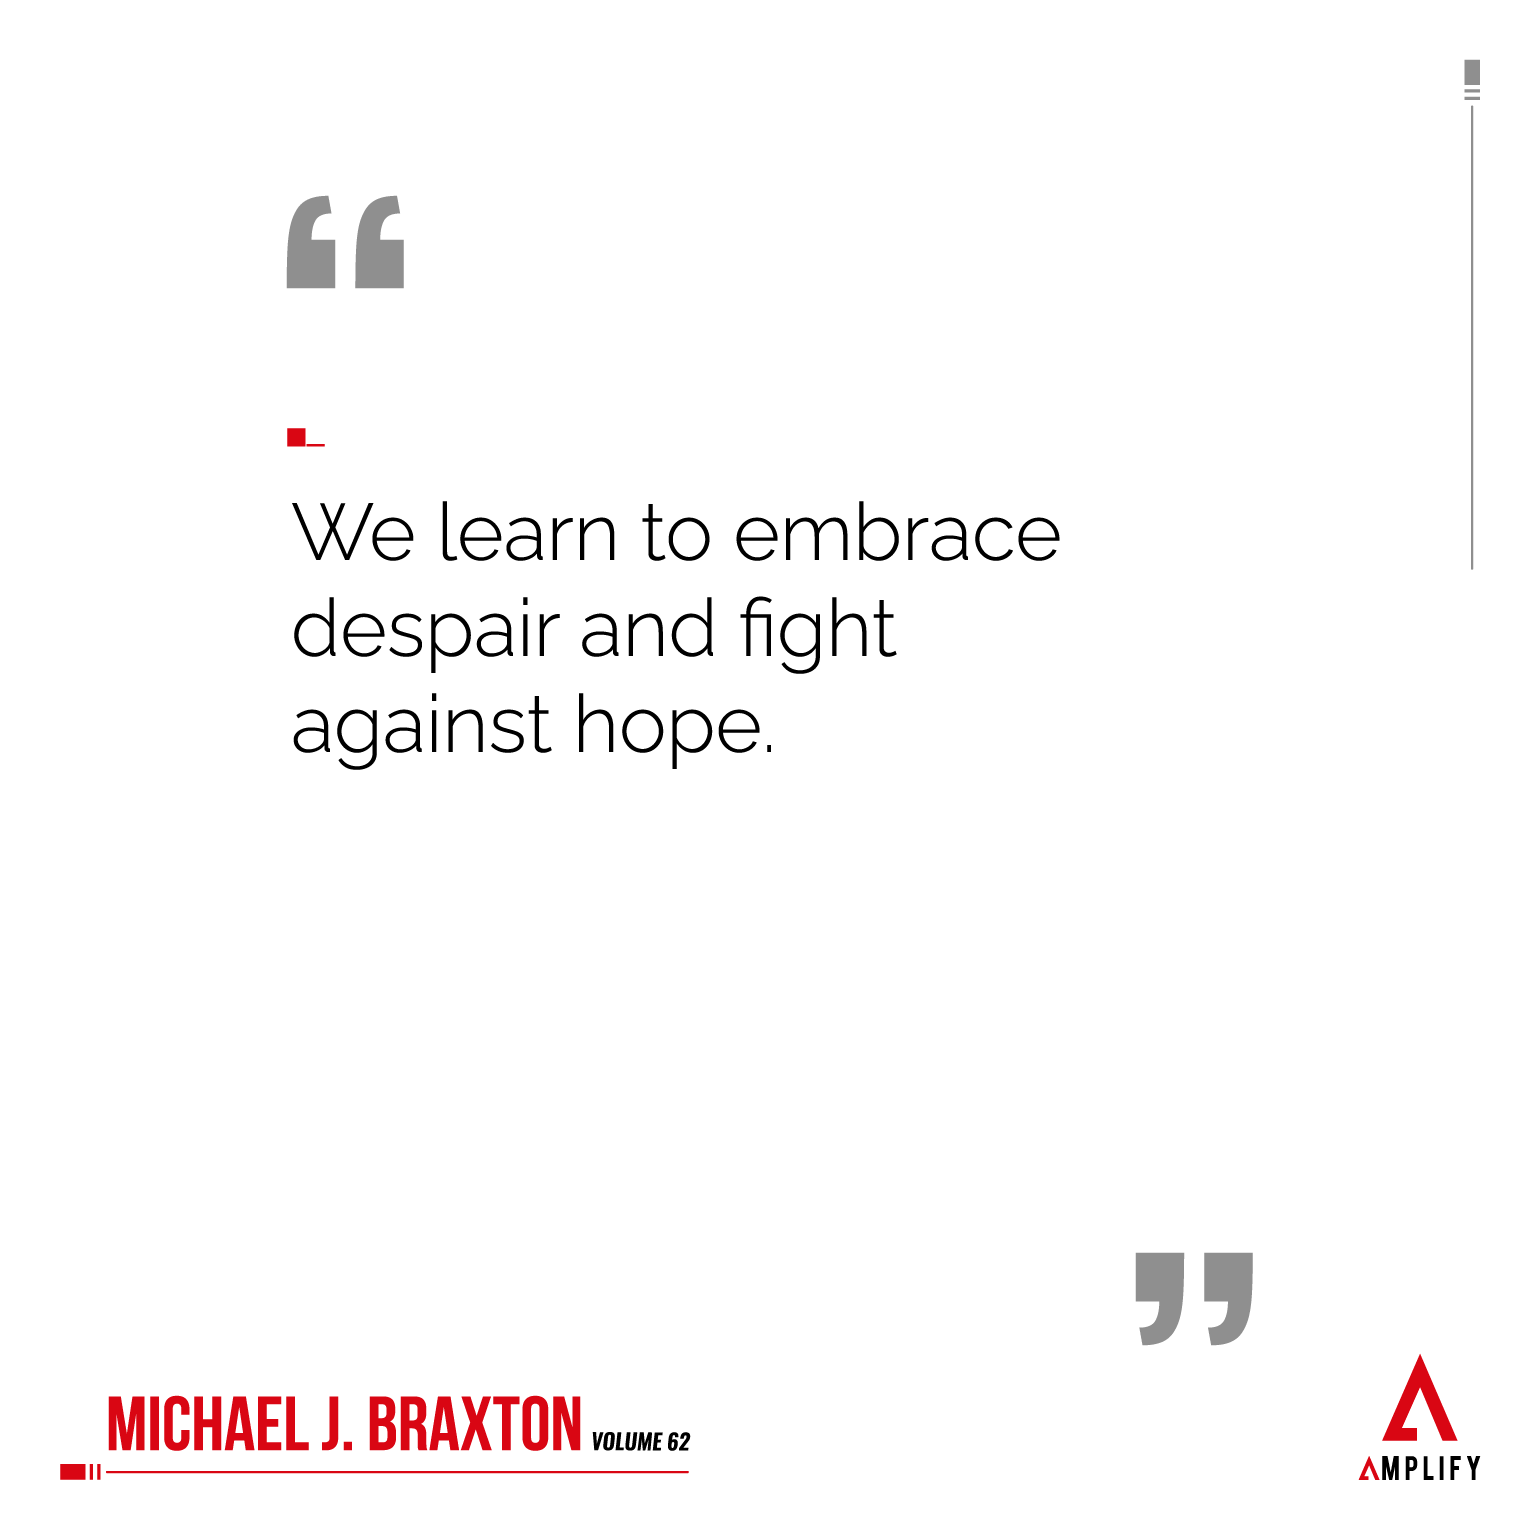 Quote: We learn to embrace despair and fight against hope.